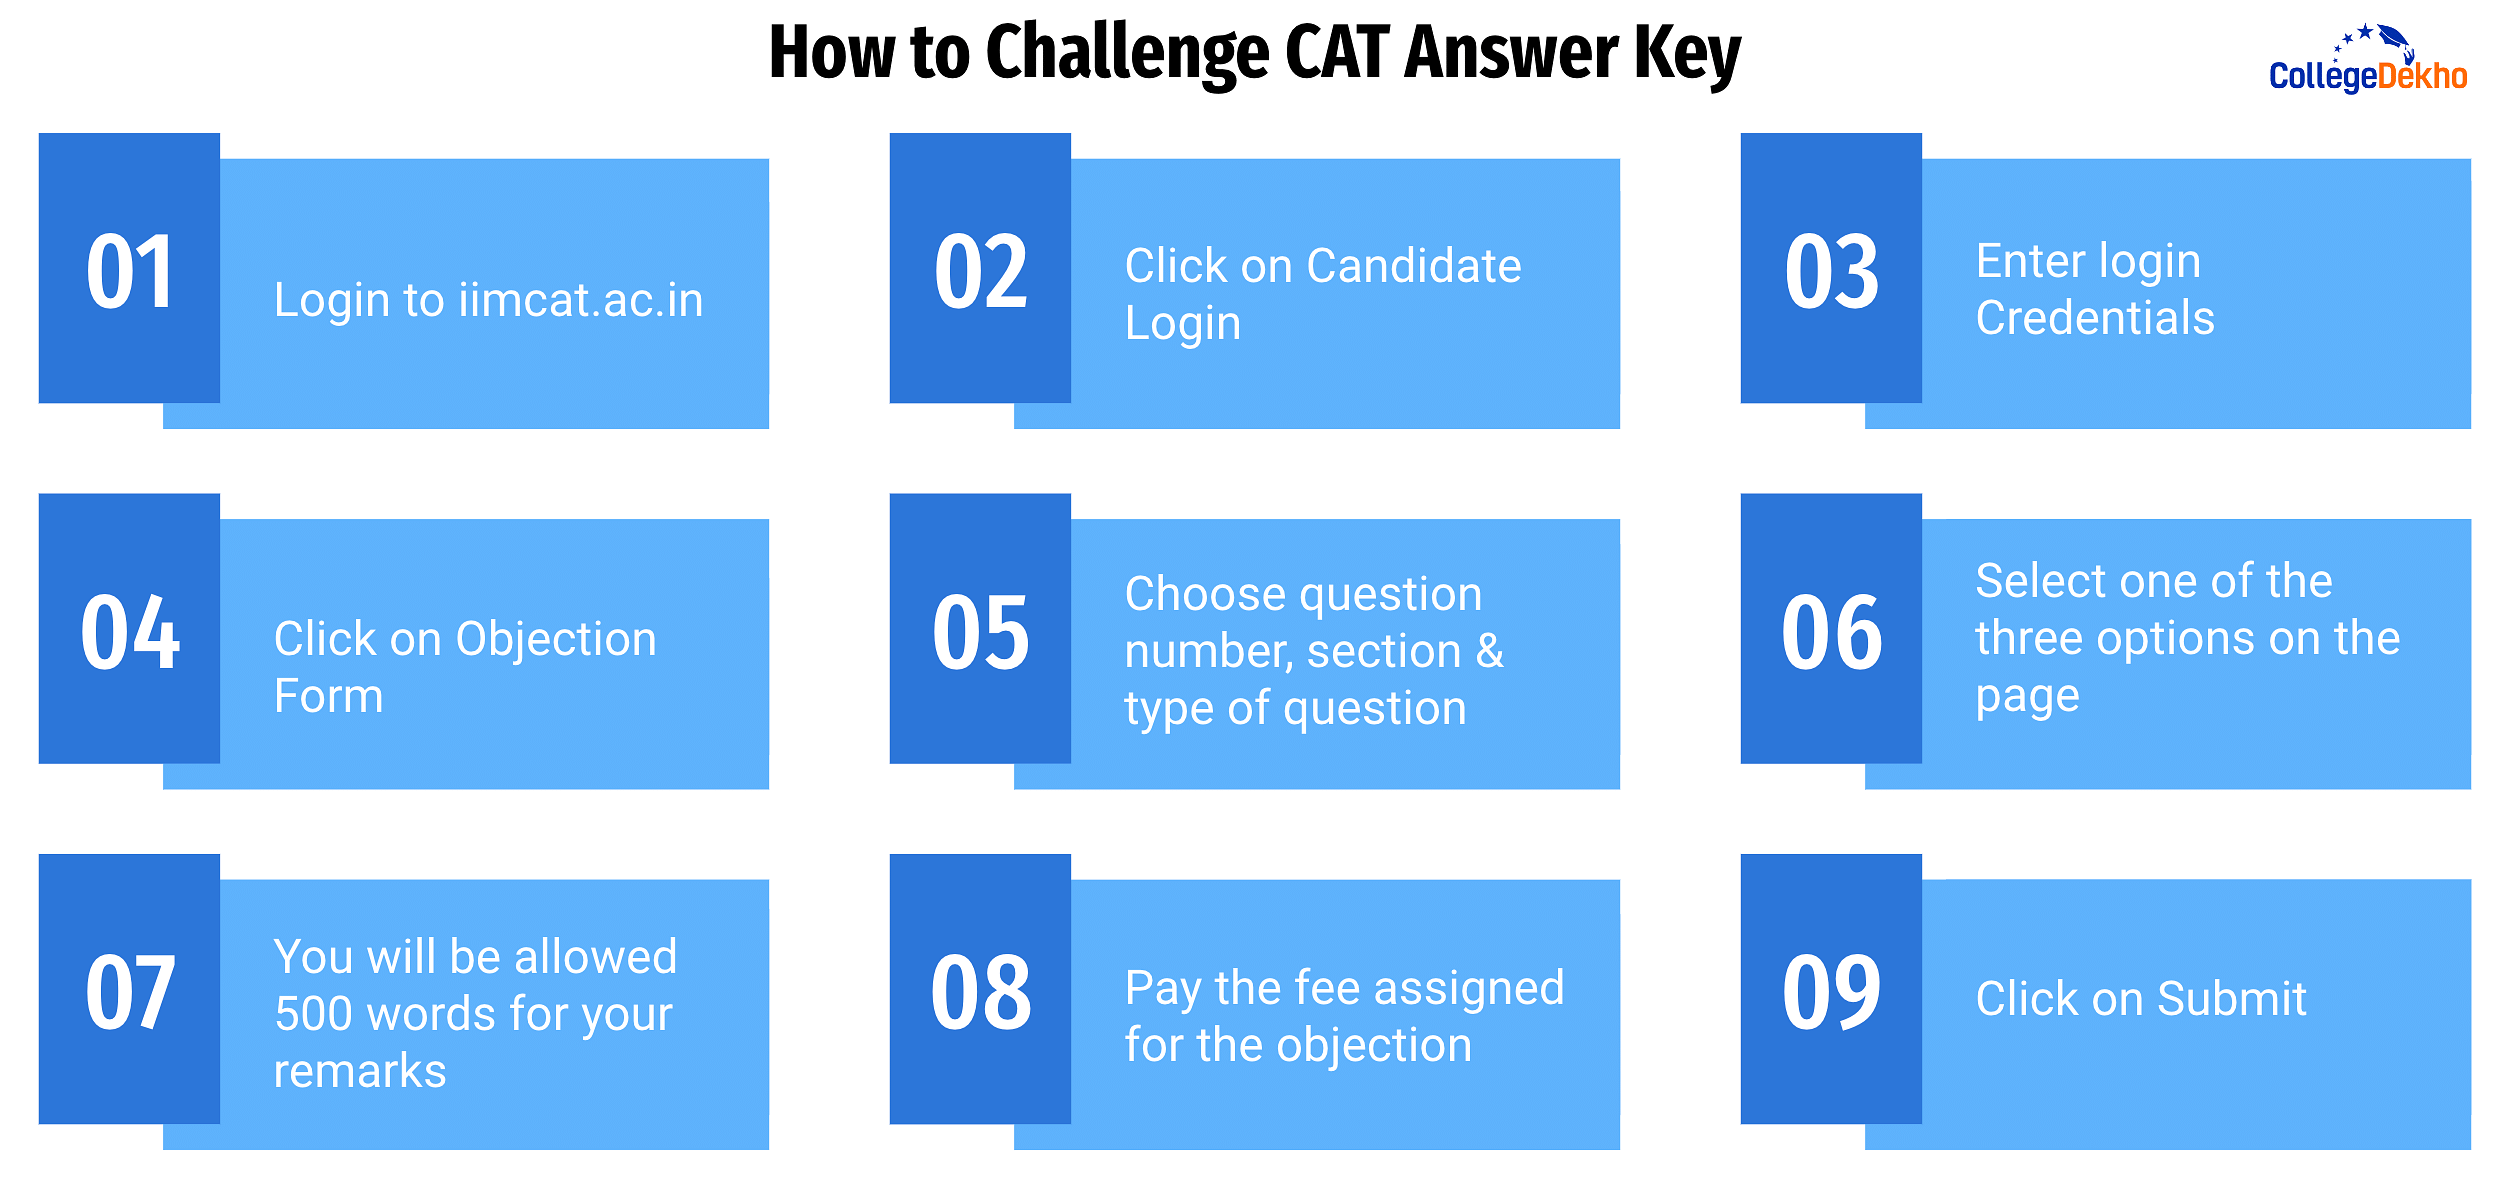 How to Challenge CAT Answer Key